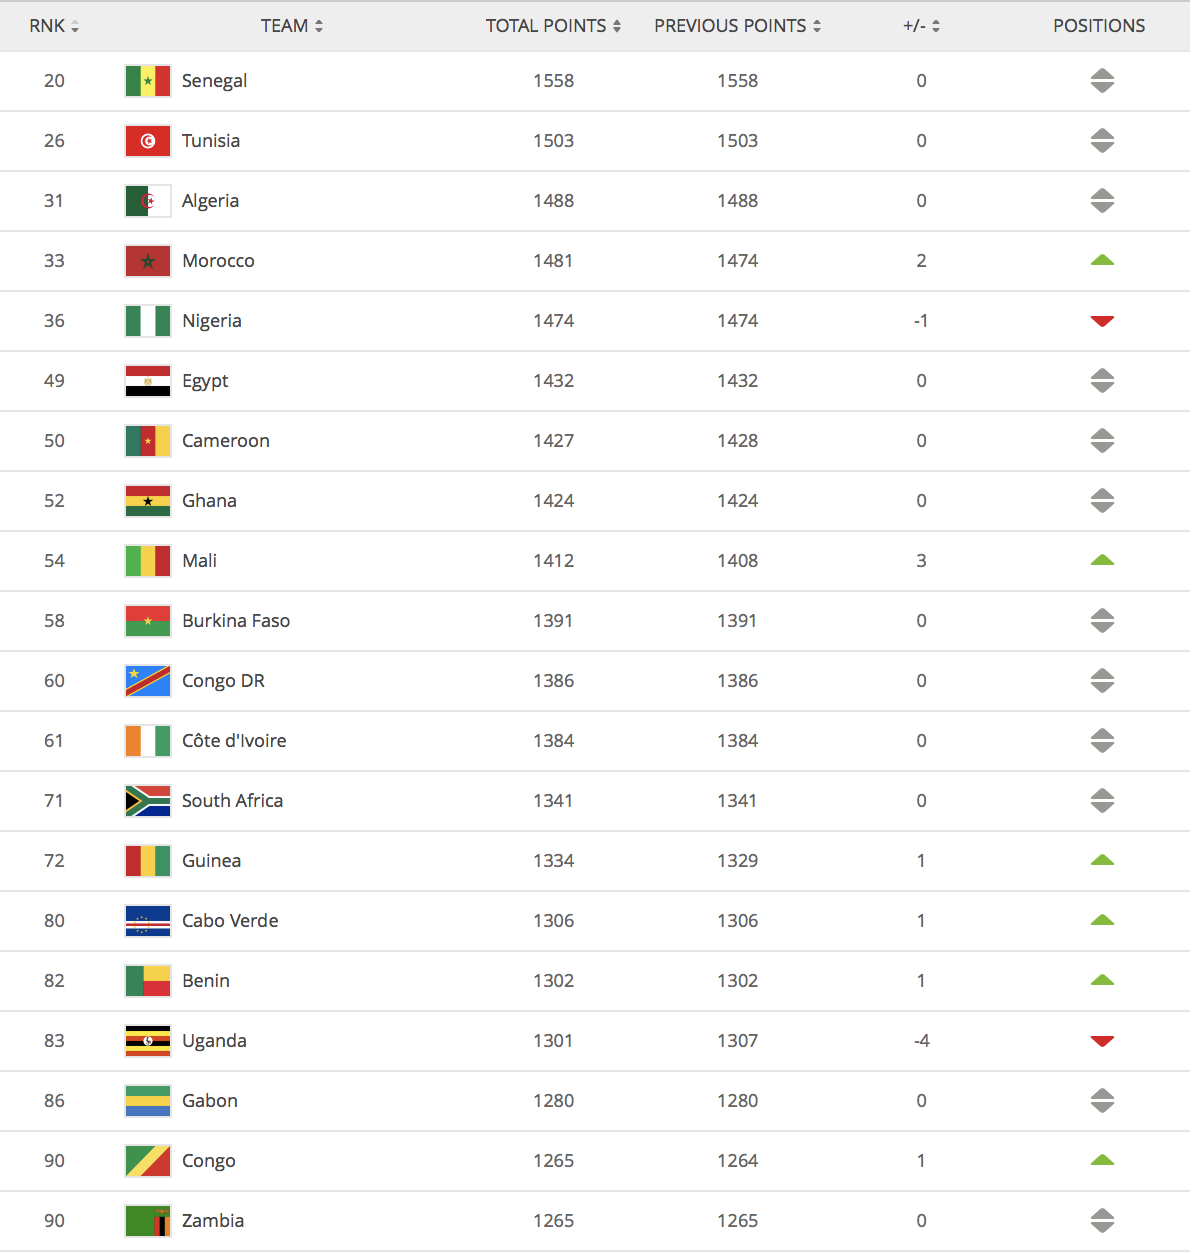 Africans jostle for FIFA ranking position as nations prepare for major